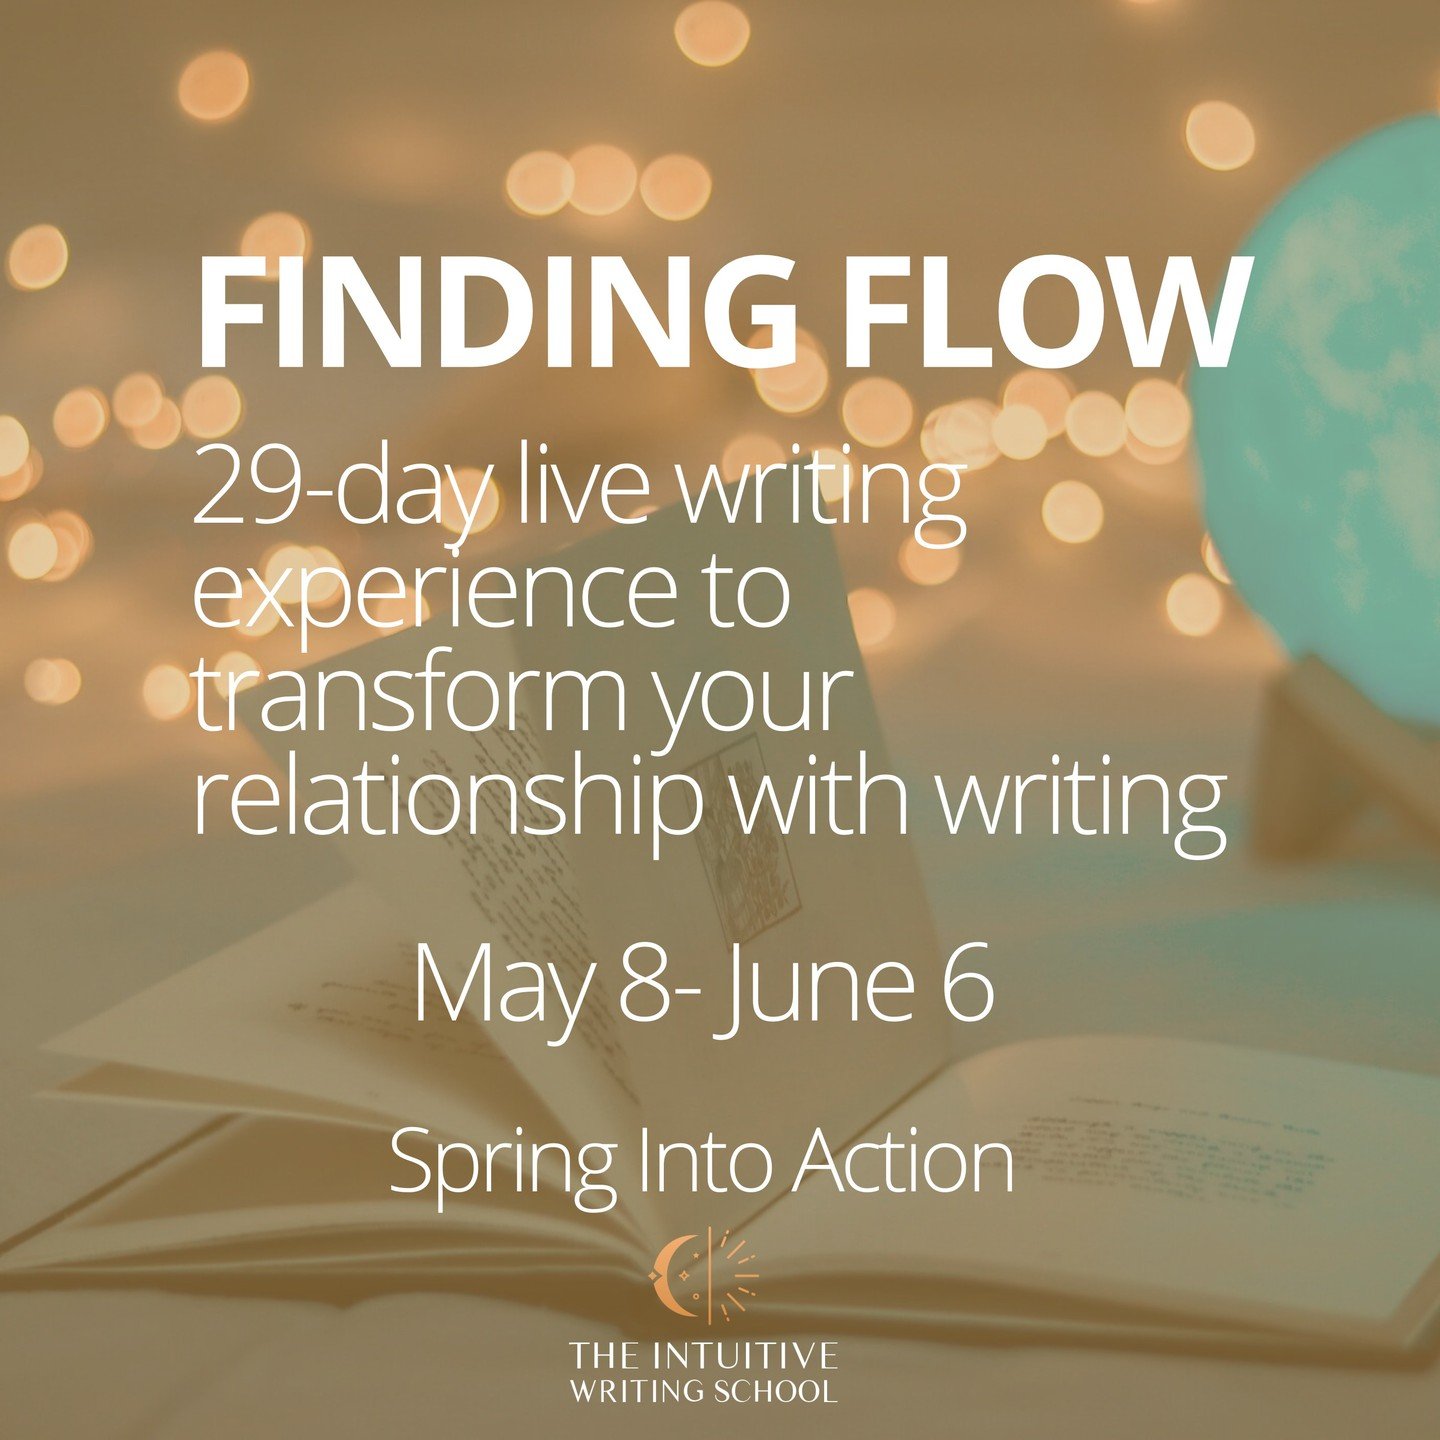 🚀 Finding Flow is officially OPEN!

I've been getting the nudge to run Finding Flow earlier than planned. Originally scheduled for August, I'm feeling the spring energy so strongly.

Deepening my intuition and tuning into what's aligned for me in th